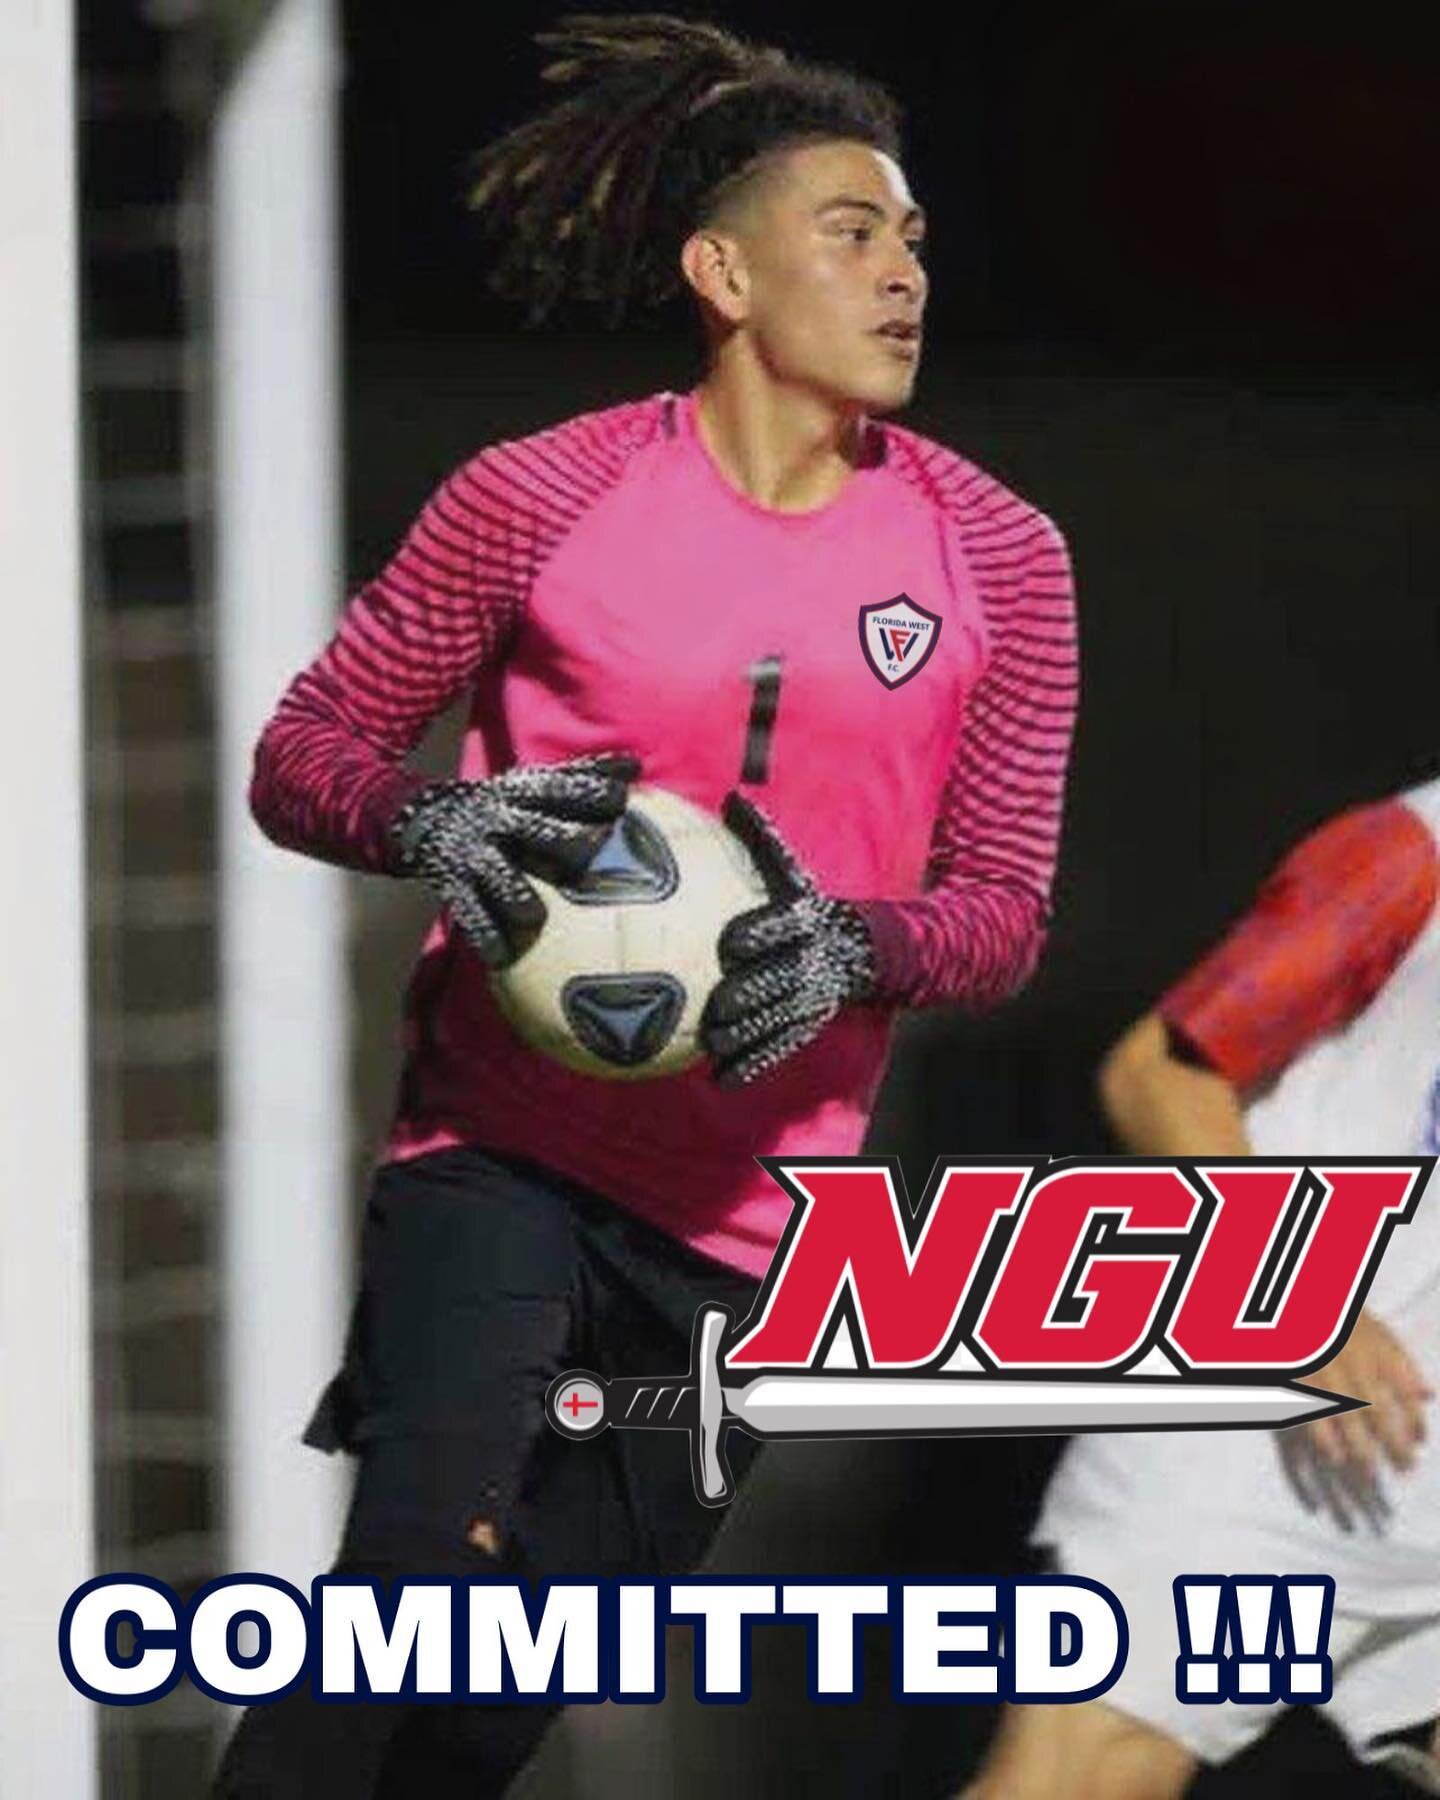 Congratulations to Elijah Perez who committed to North Greenville University 💪🏼⚽️🎓 #1inSWFL #FLWestFC #SuccessisaChoice #bmwofnaples #sportsrecruits #college #nextlevel